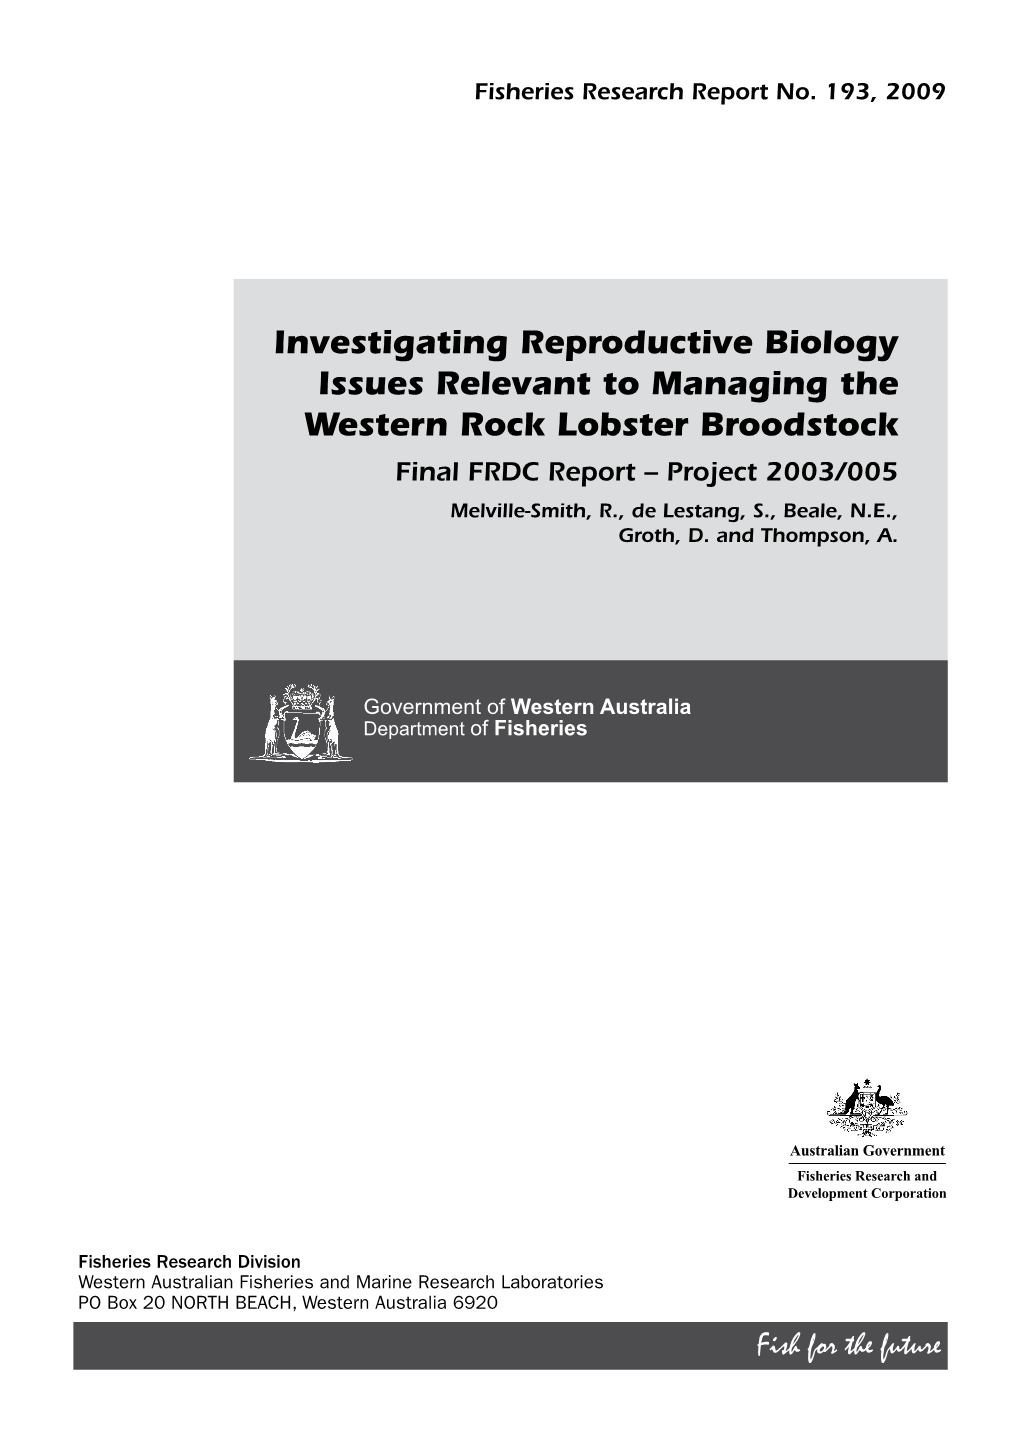 Investigating Reproductive Biology Issues Relevant to Managing The